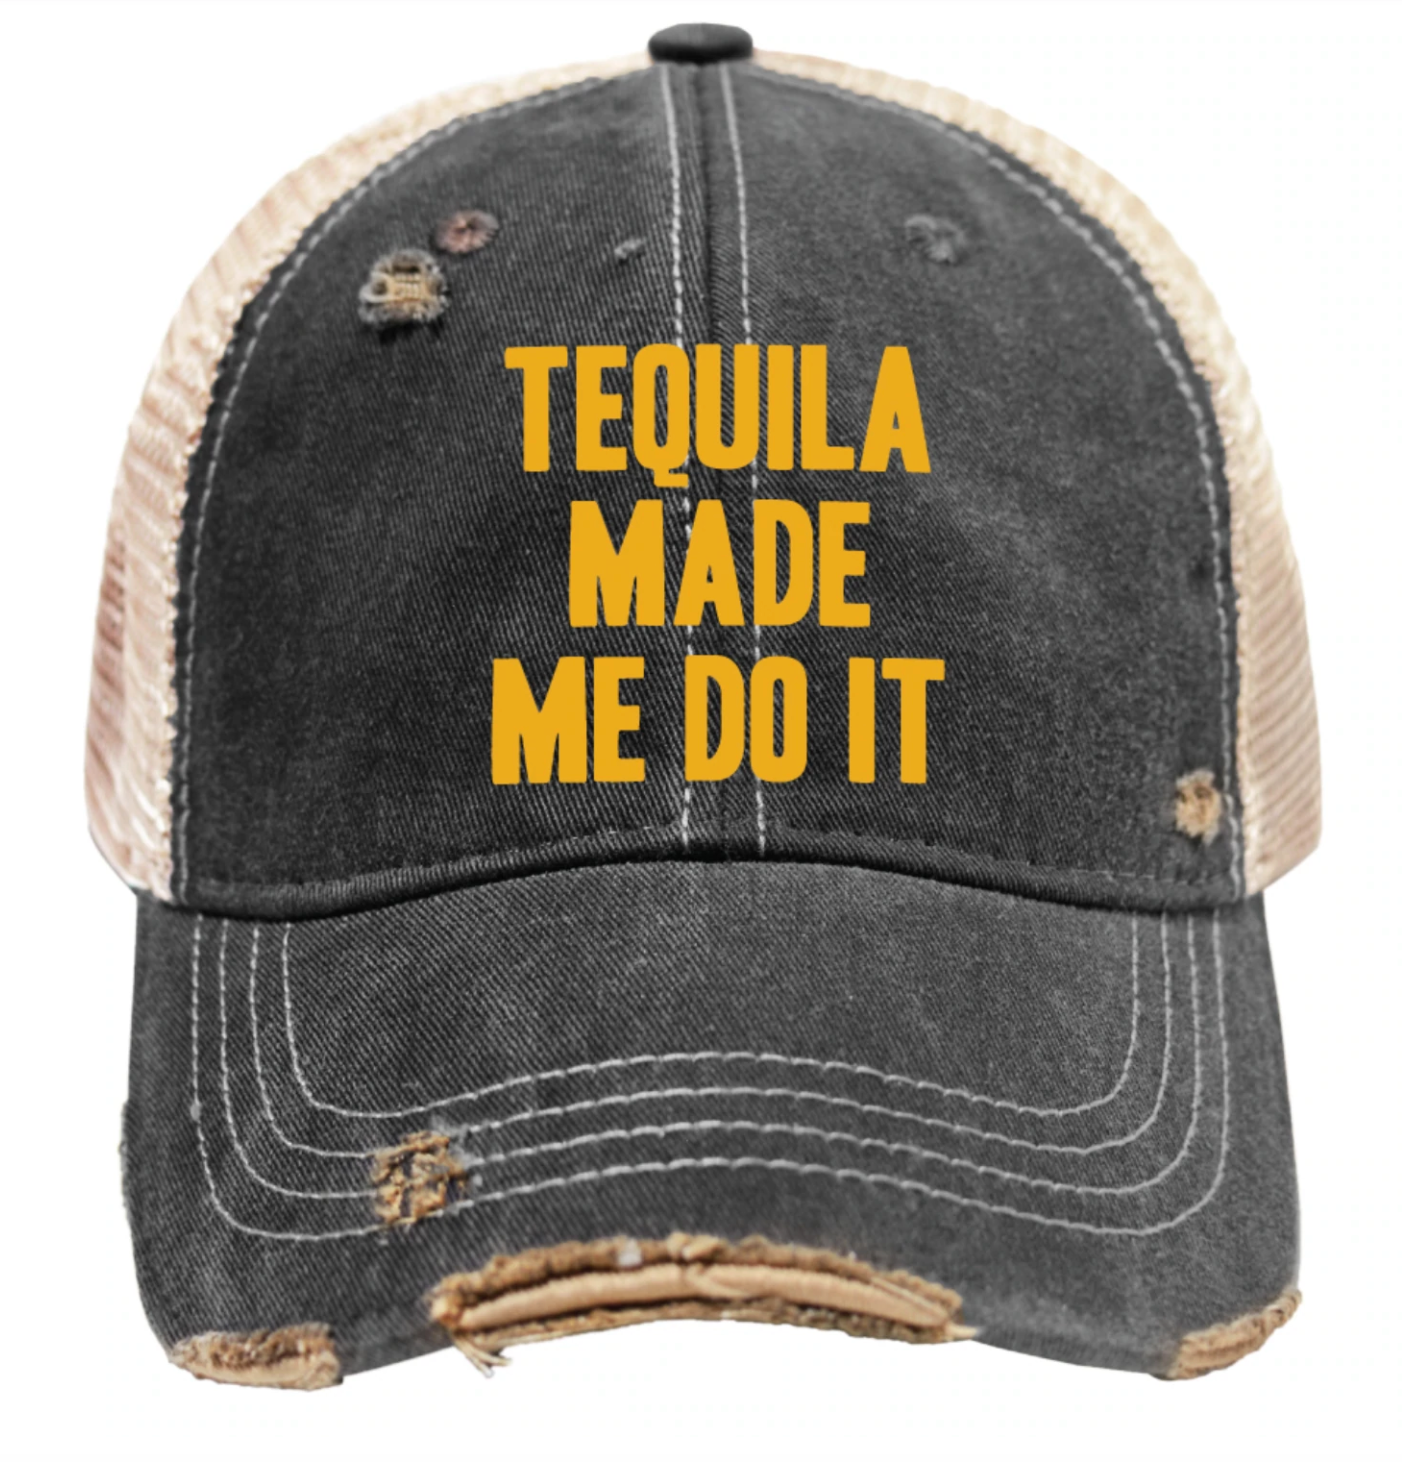 Tequila Made Me Do It Snap Back Trucker Cap